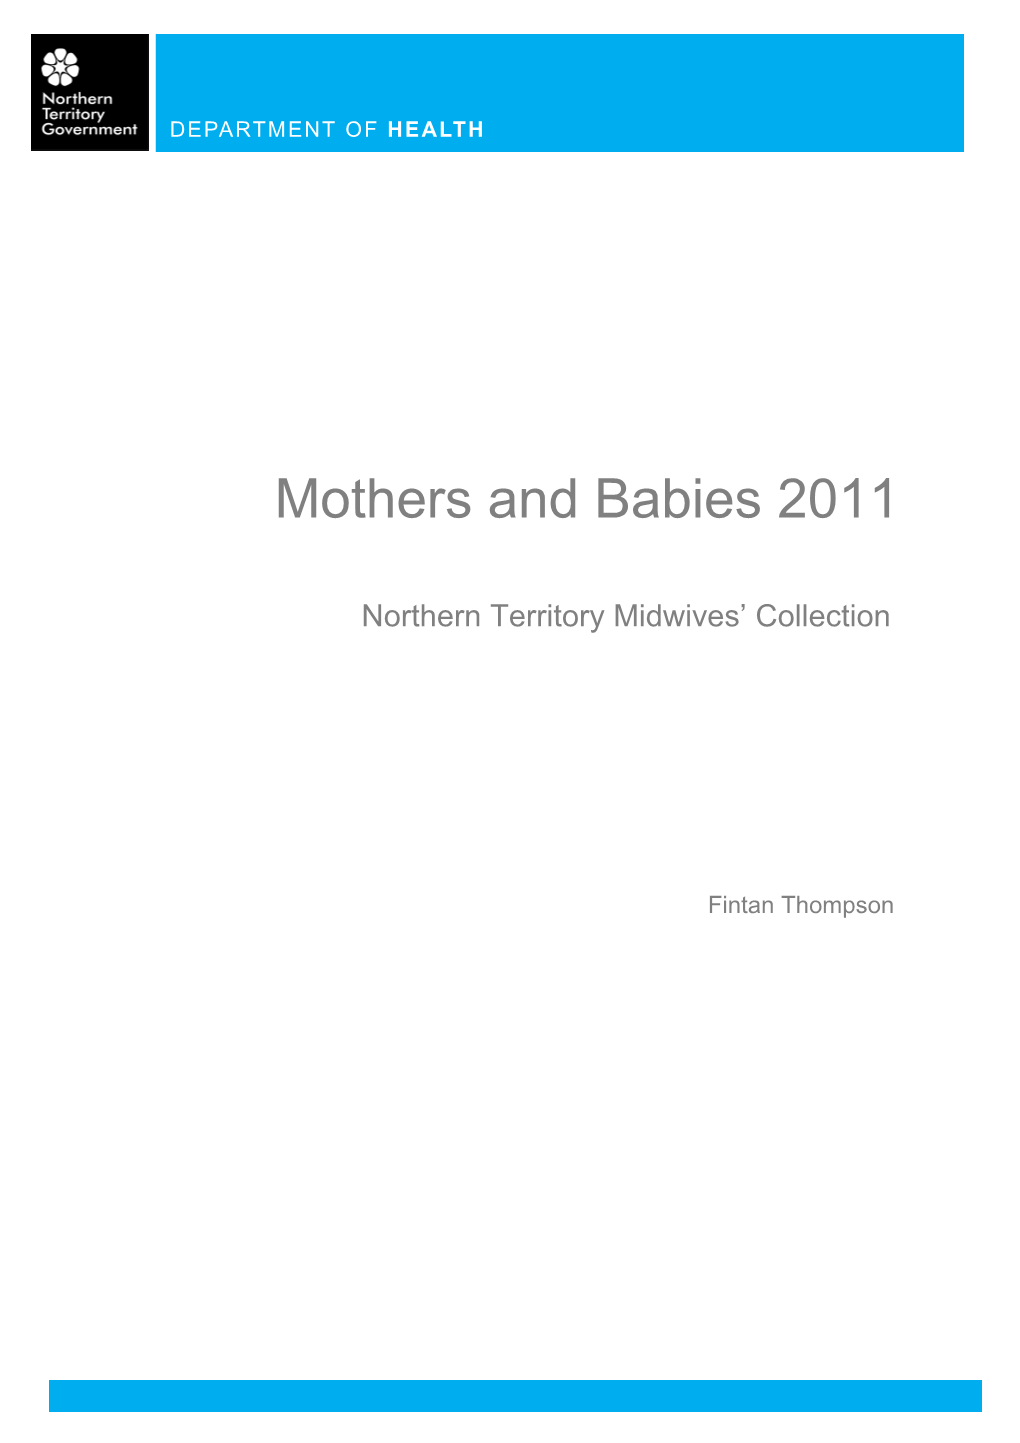 Northern Territory Midwives Collection